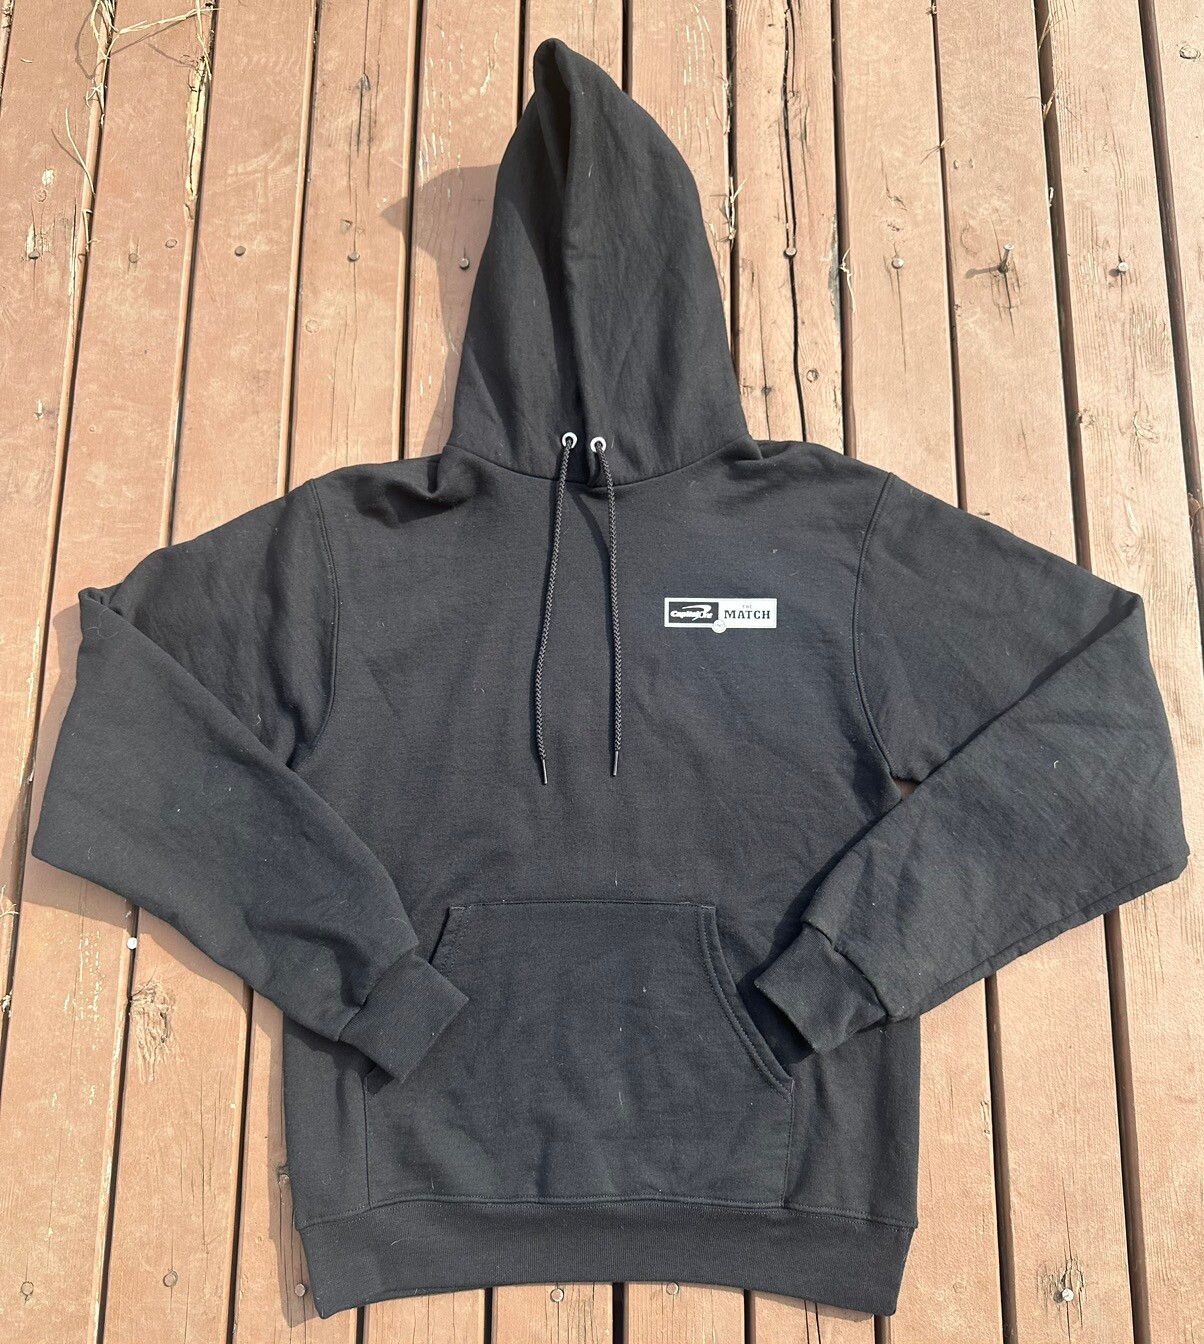 Vintage Capital One TNT The Match Bleacher Report Champion Hoodie Size US S / EU 44-46 / 1 - 1 Preview